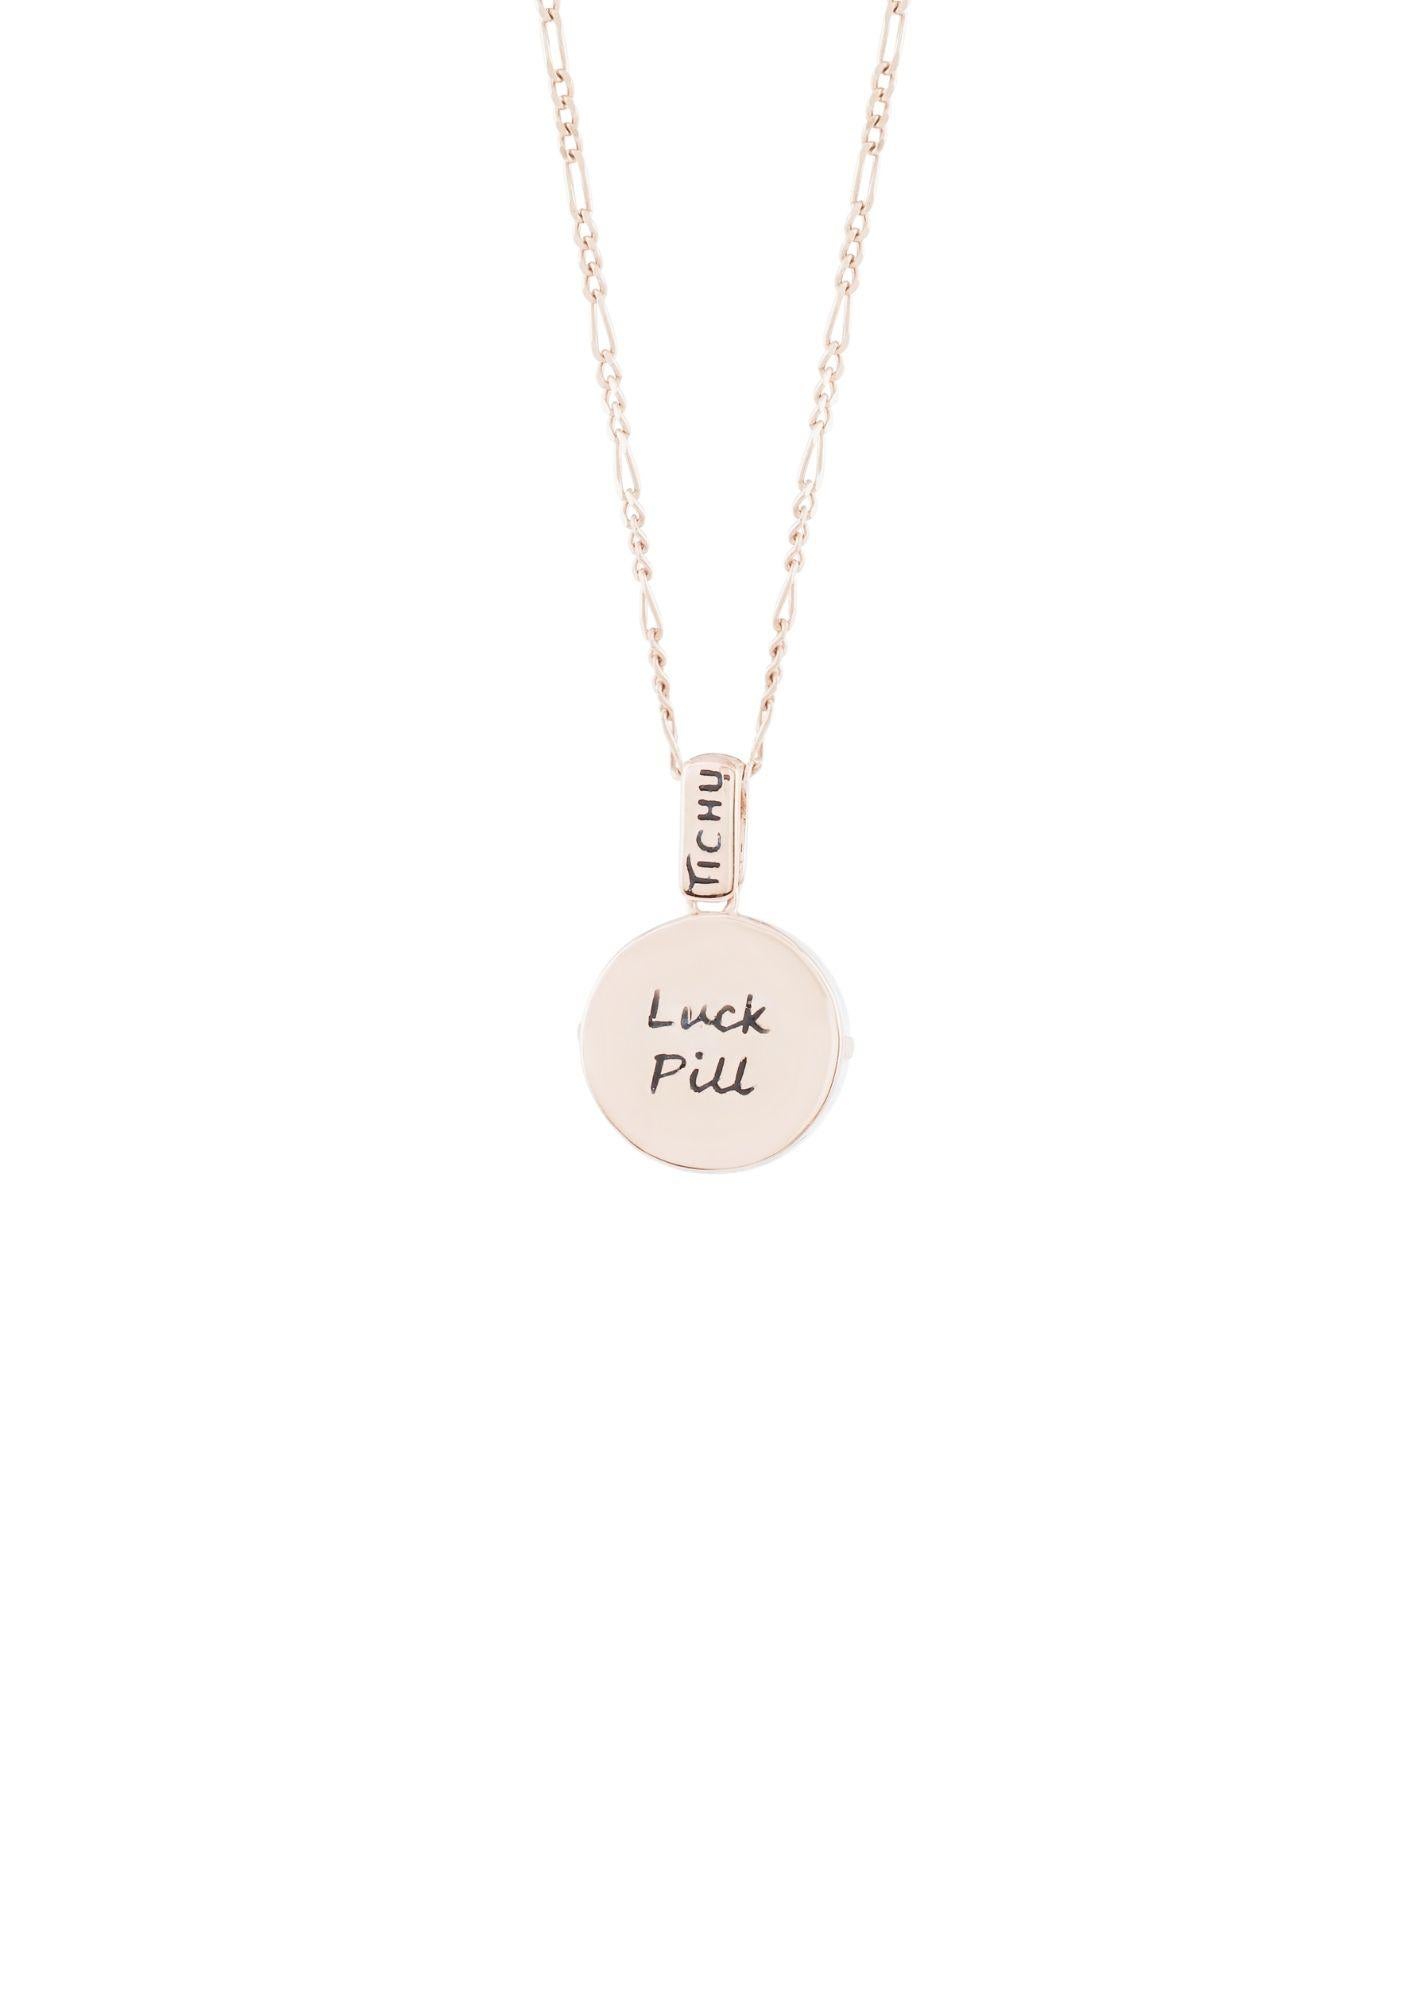 Fate is predestined by things we create unconsciously for ourselves. The Luck Pill reinforces only positive energies, building good luck.

Each Luck Pill Pendant is handcrafted in Sterling Silver, specially Pill cut Crystal Quartz. The use of